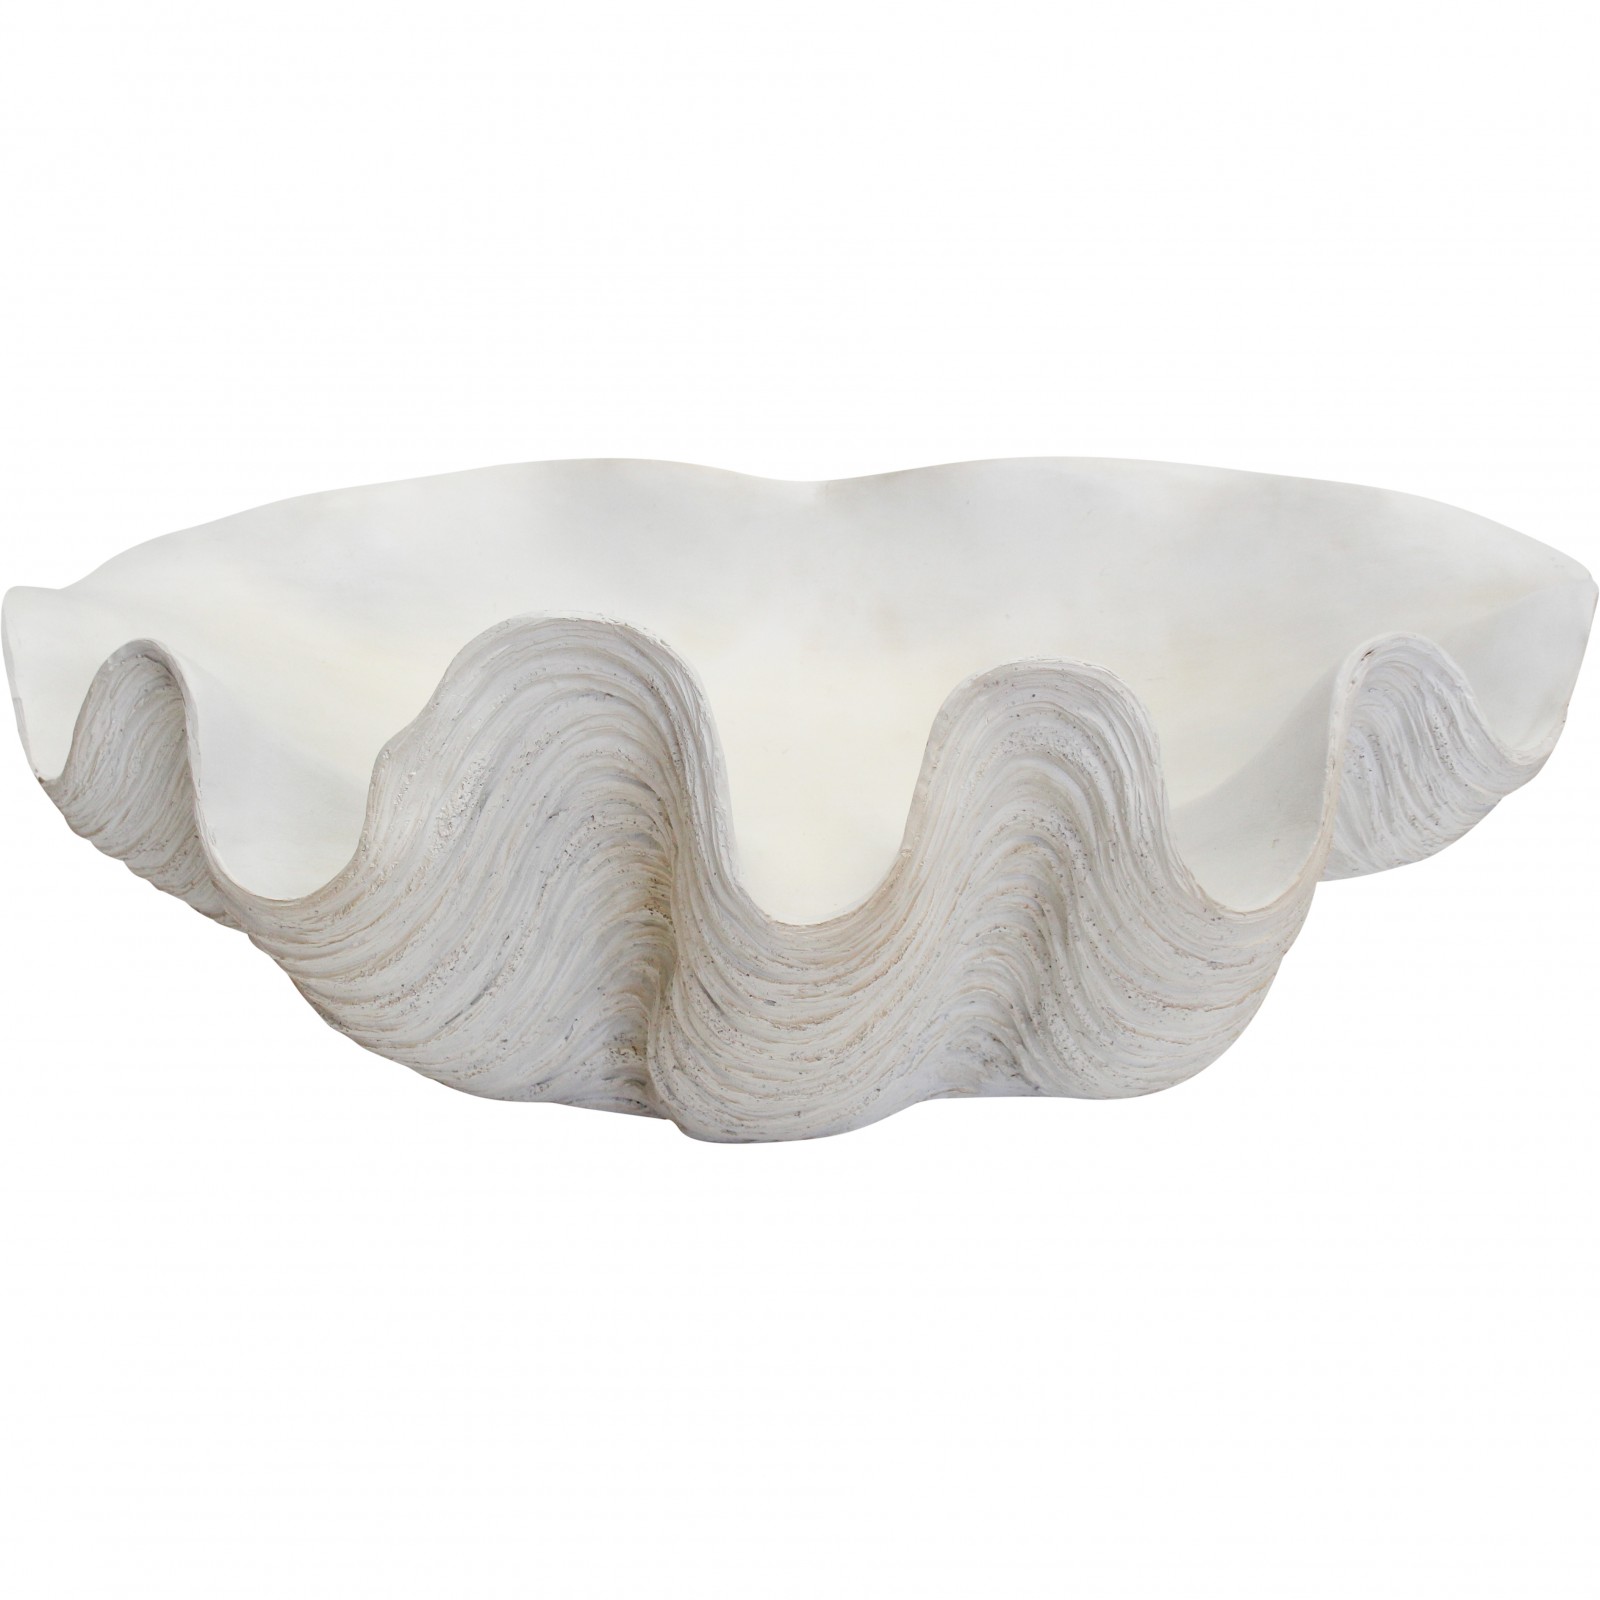 #Clam Shell Giant White